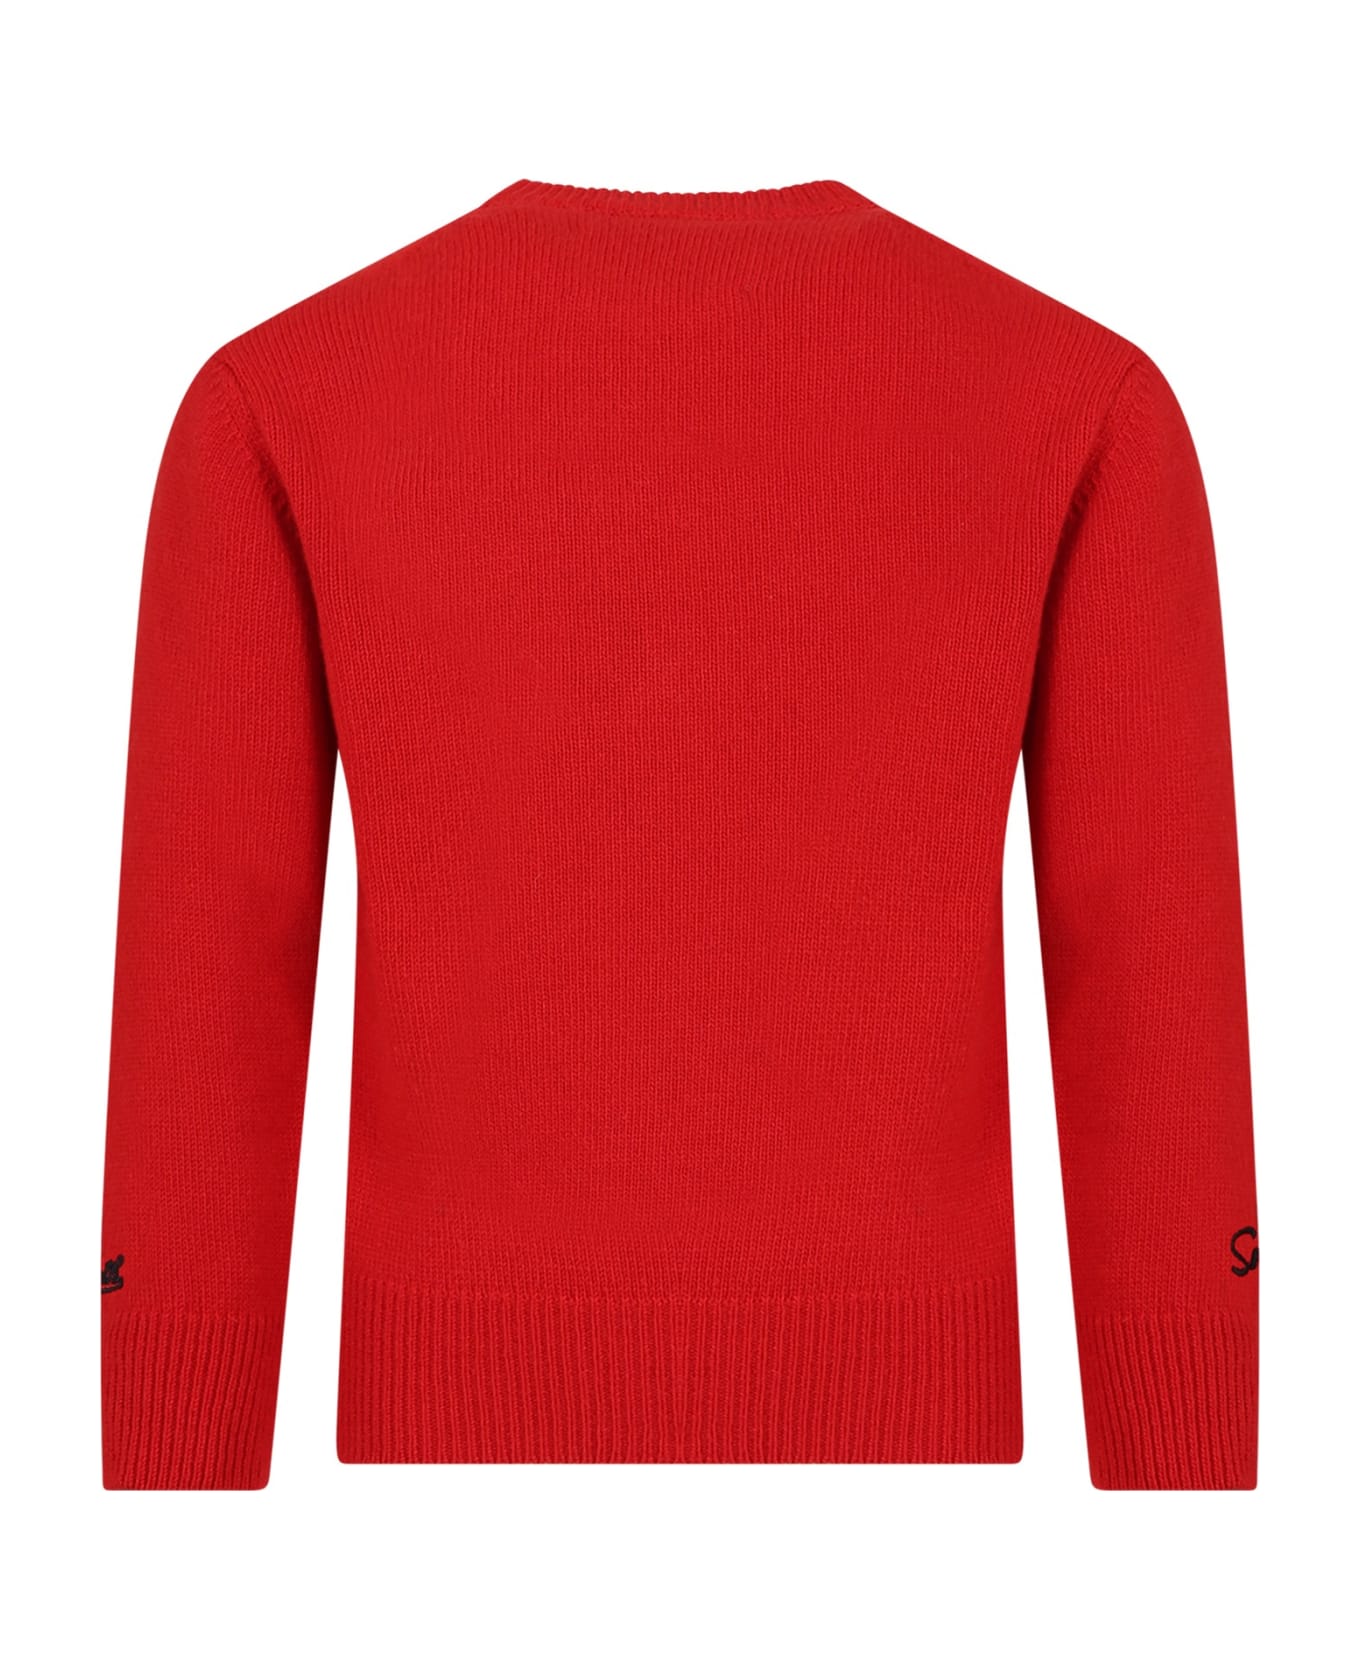 MC2 Saint Barth Red Sweater For Boy With Bart Simpson - Red